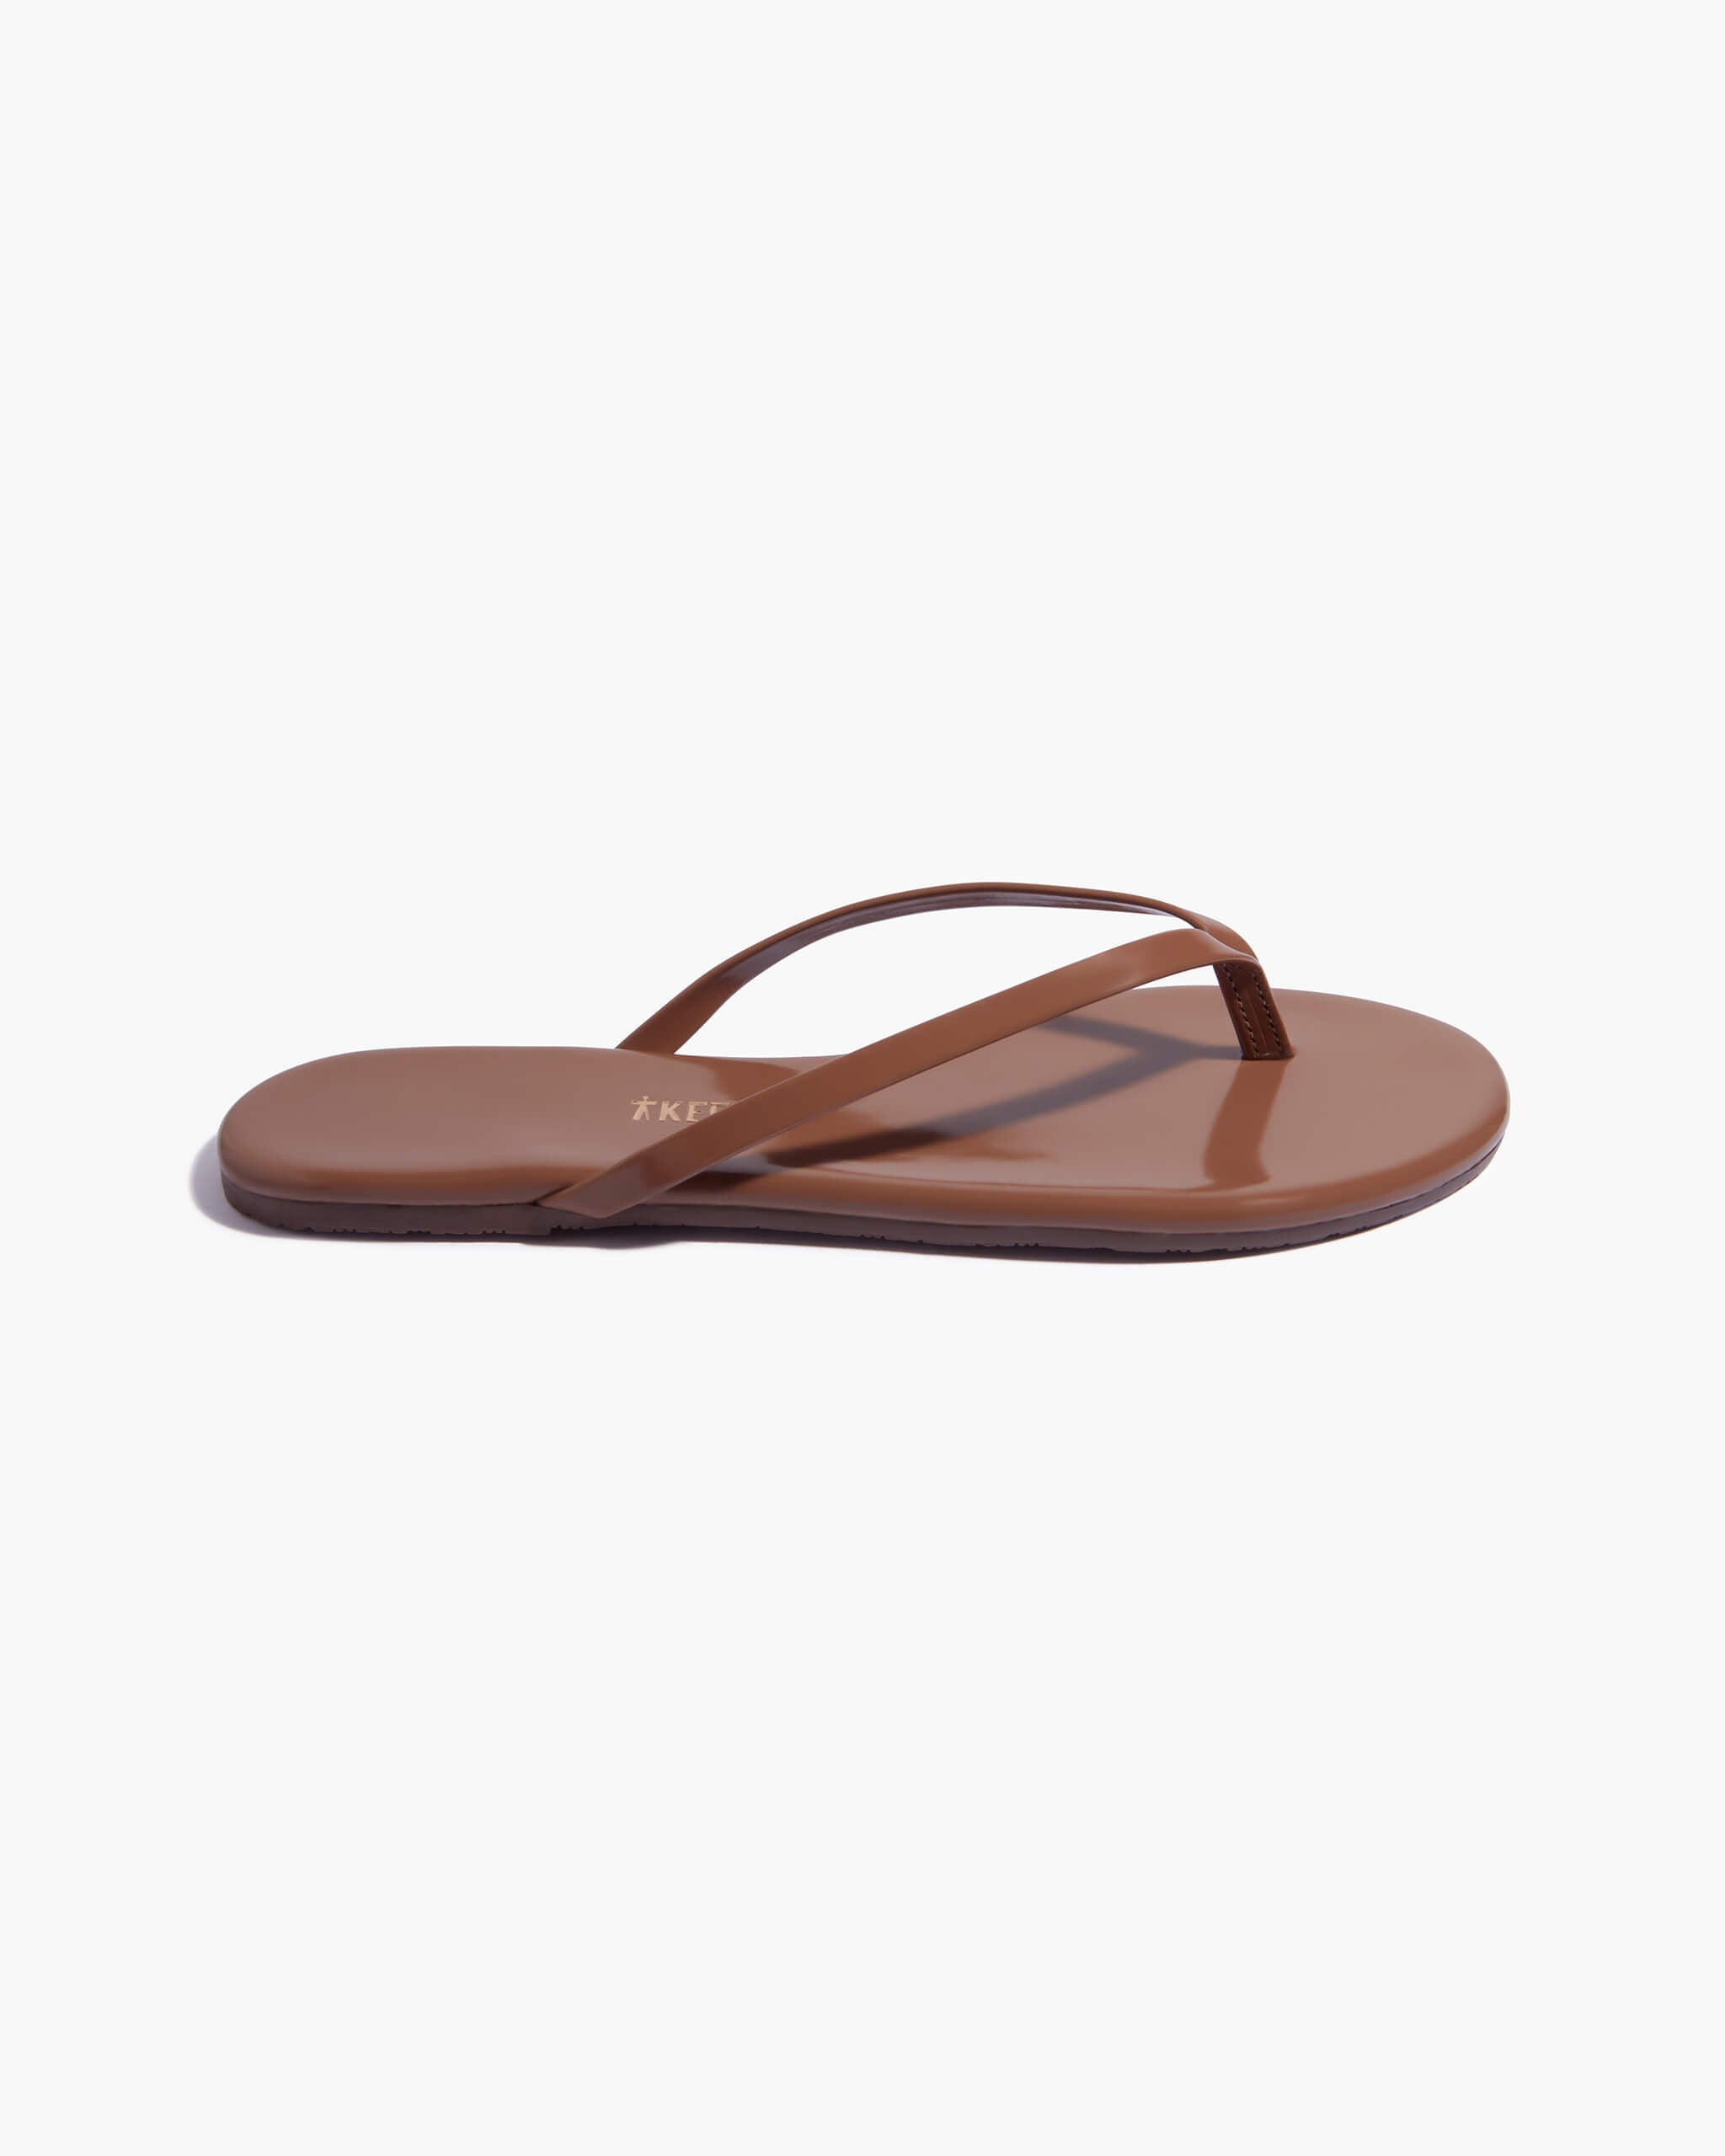 Lily Glosses in Beach Bum | Women's Sandals | TKEES – TKEES